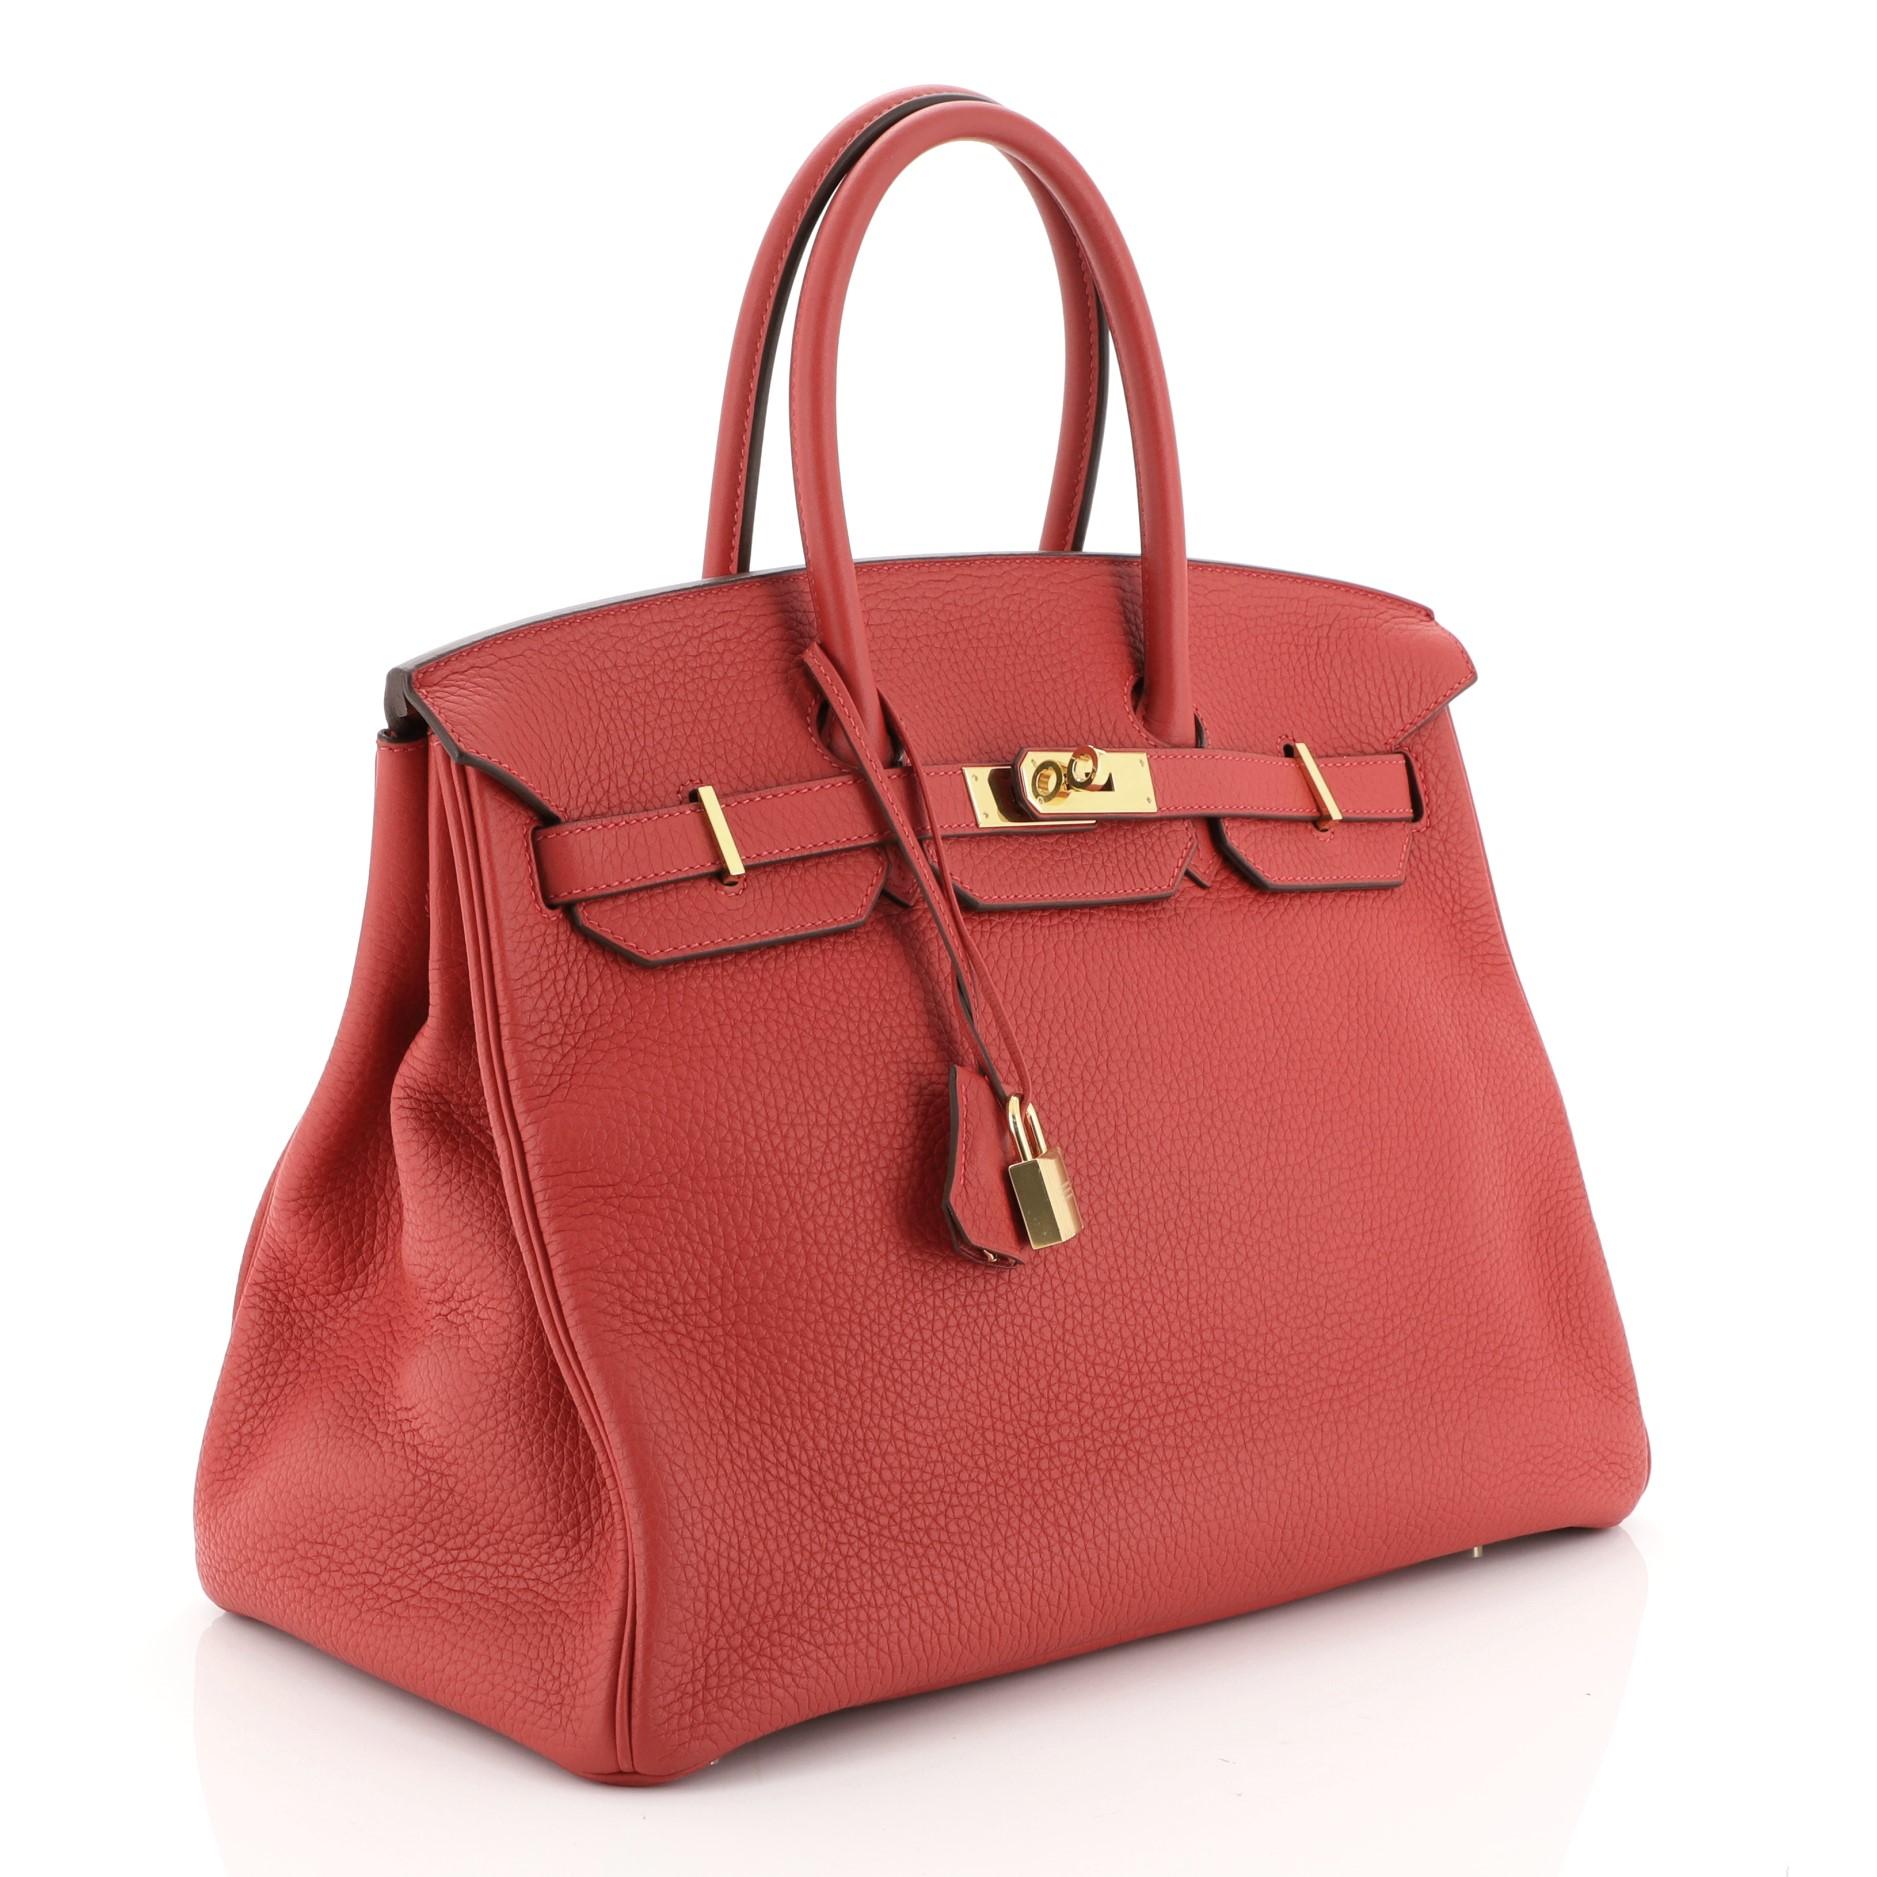 This Hermes Birkin Handbag Rouge Vif Clemence with Gold Hardware 35, crafted in Rouge Vif red Clemence leather, features dual rolled handles, frontal flap, and gold hardware. Its turn-lock closure opens to a Rouge Vif red Chevre leather interior